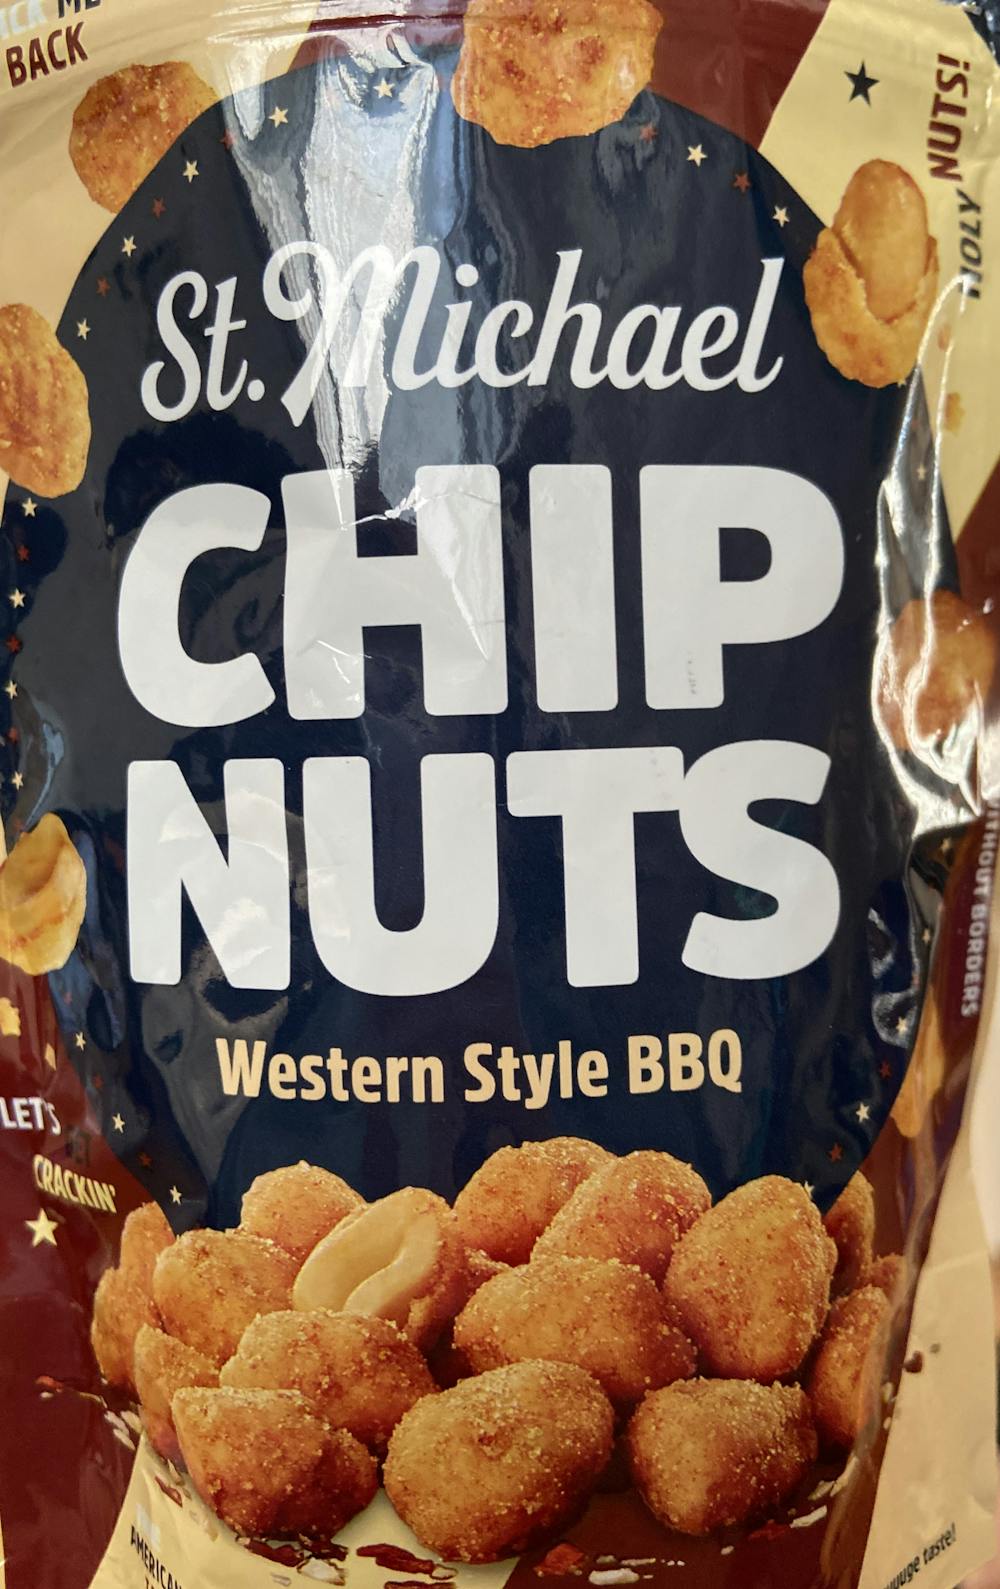 St. Michael, Chip Nuts western style BBQ